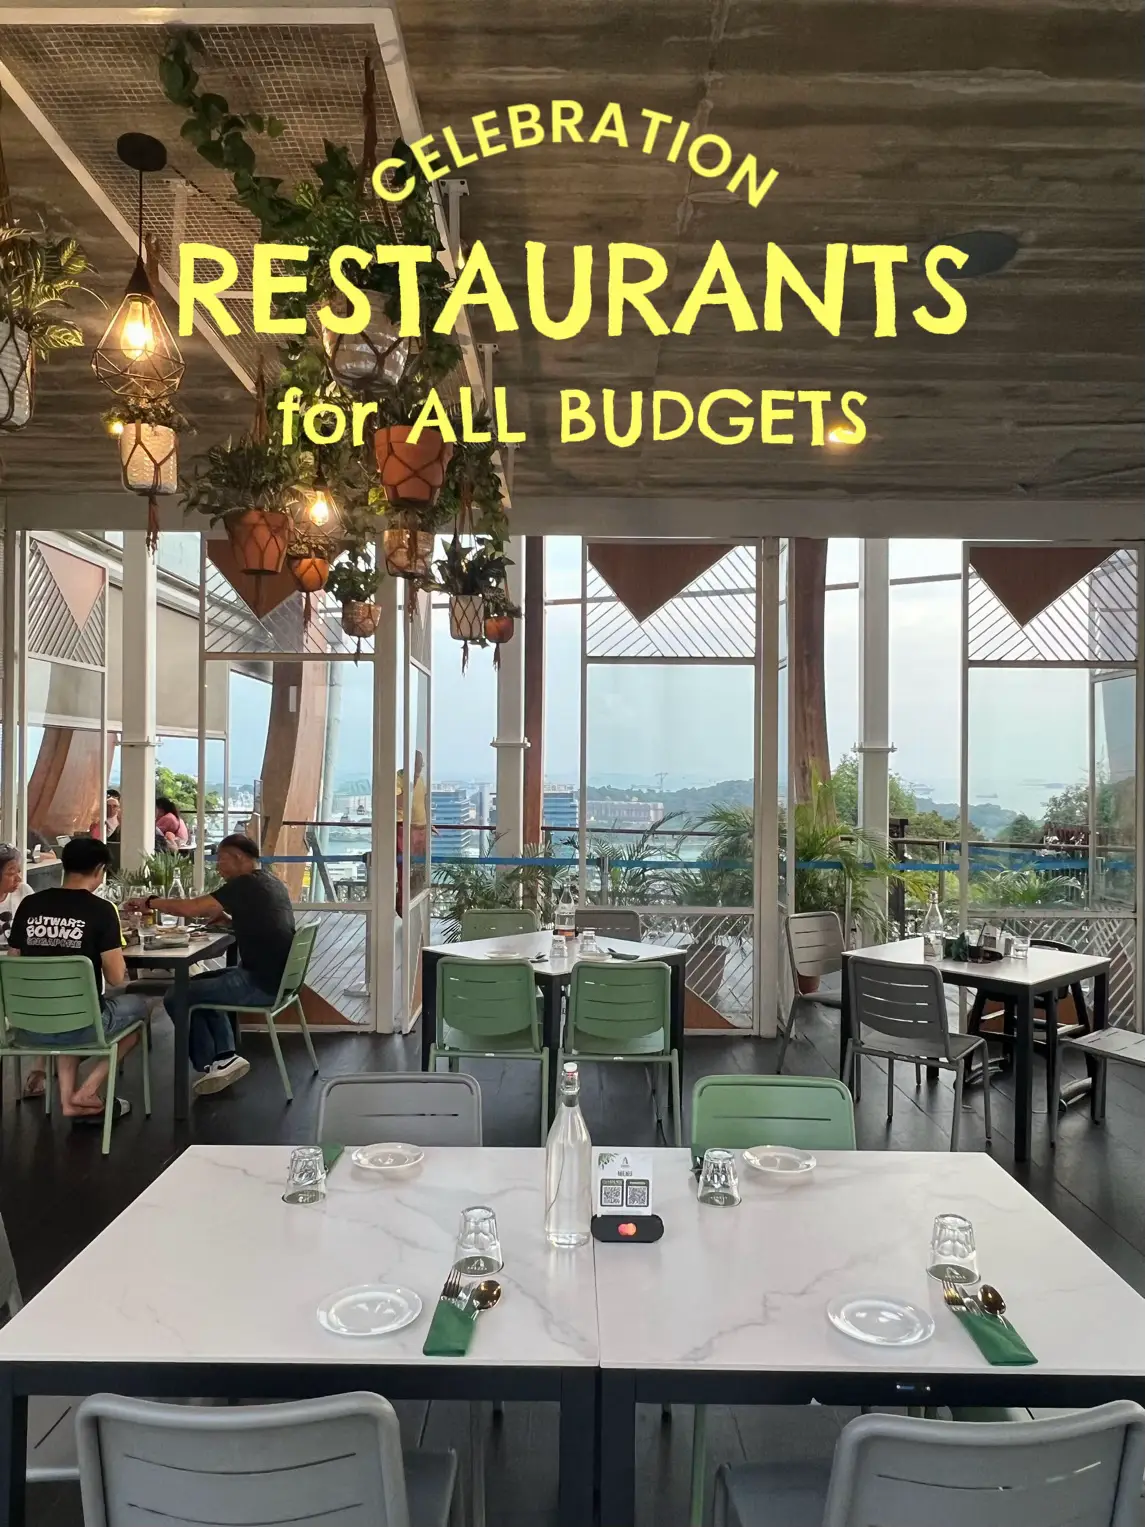 BEST restaurants for ALL BUDGETS?!🤤's images(0)